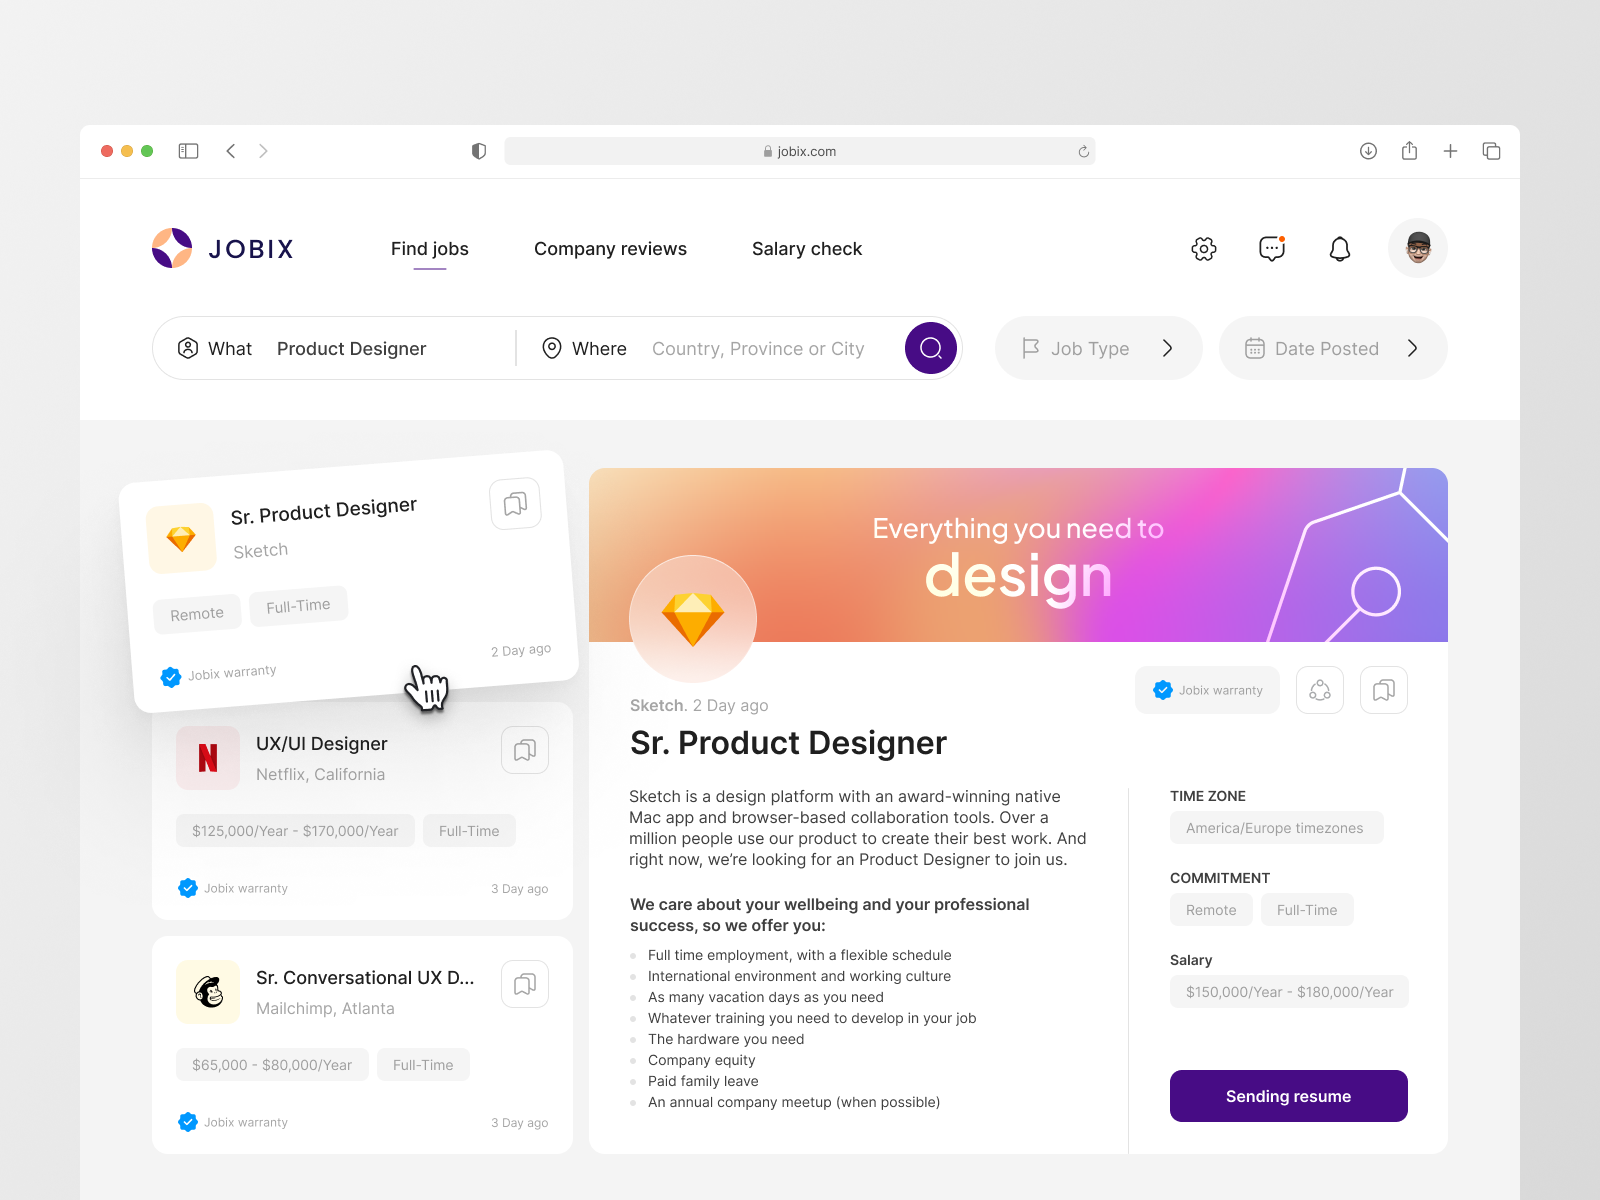 6.5 of The Most Popular UI Design Trends and Styles Explained